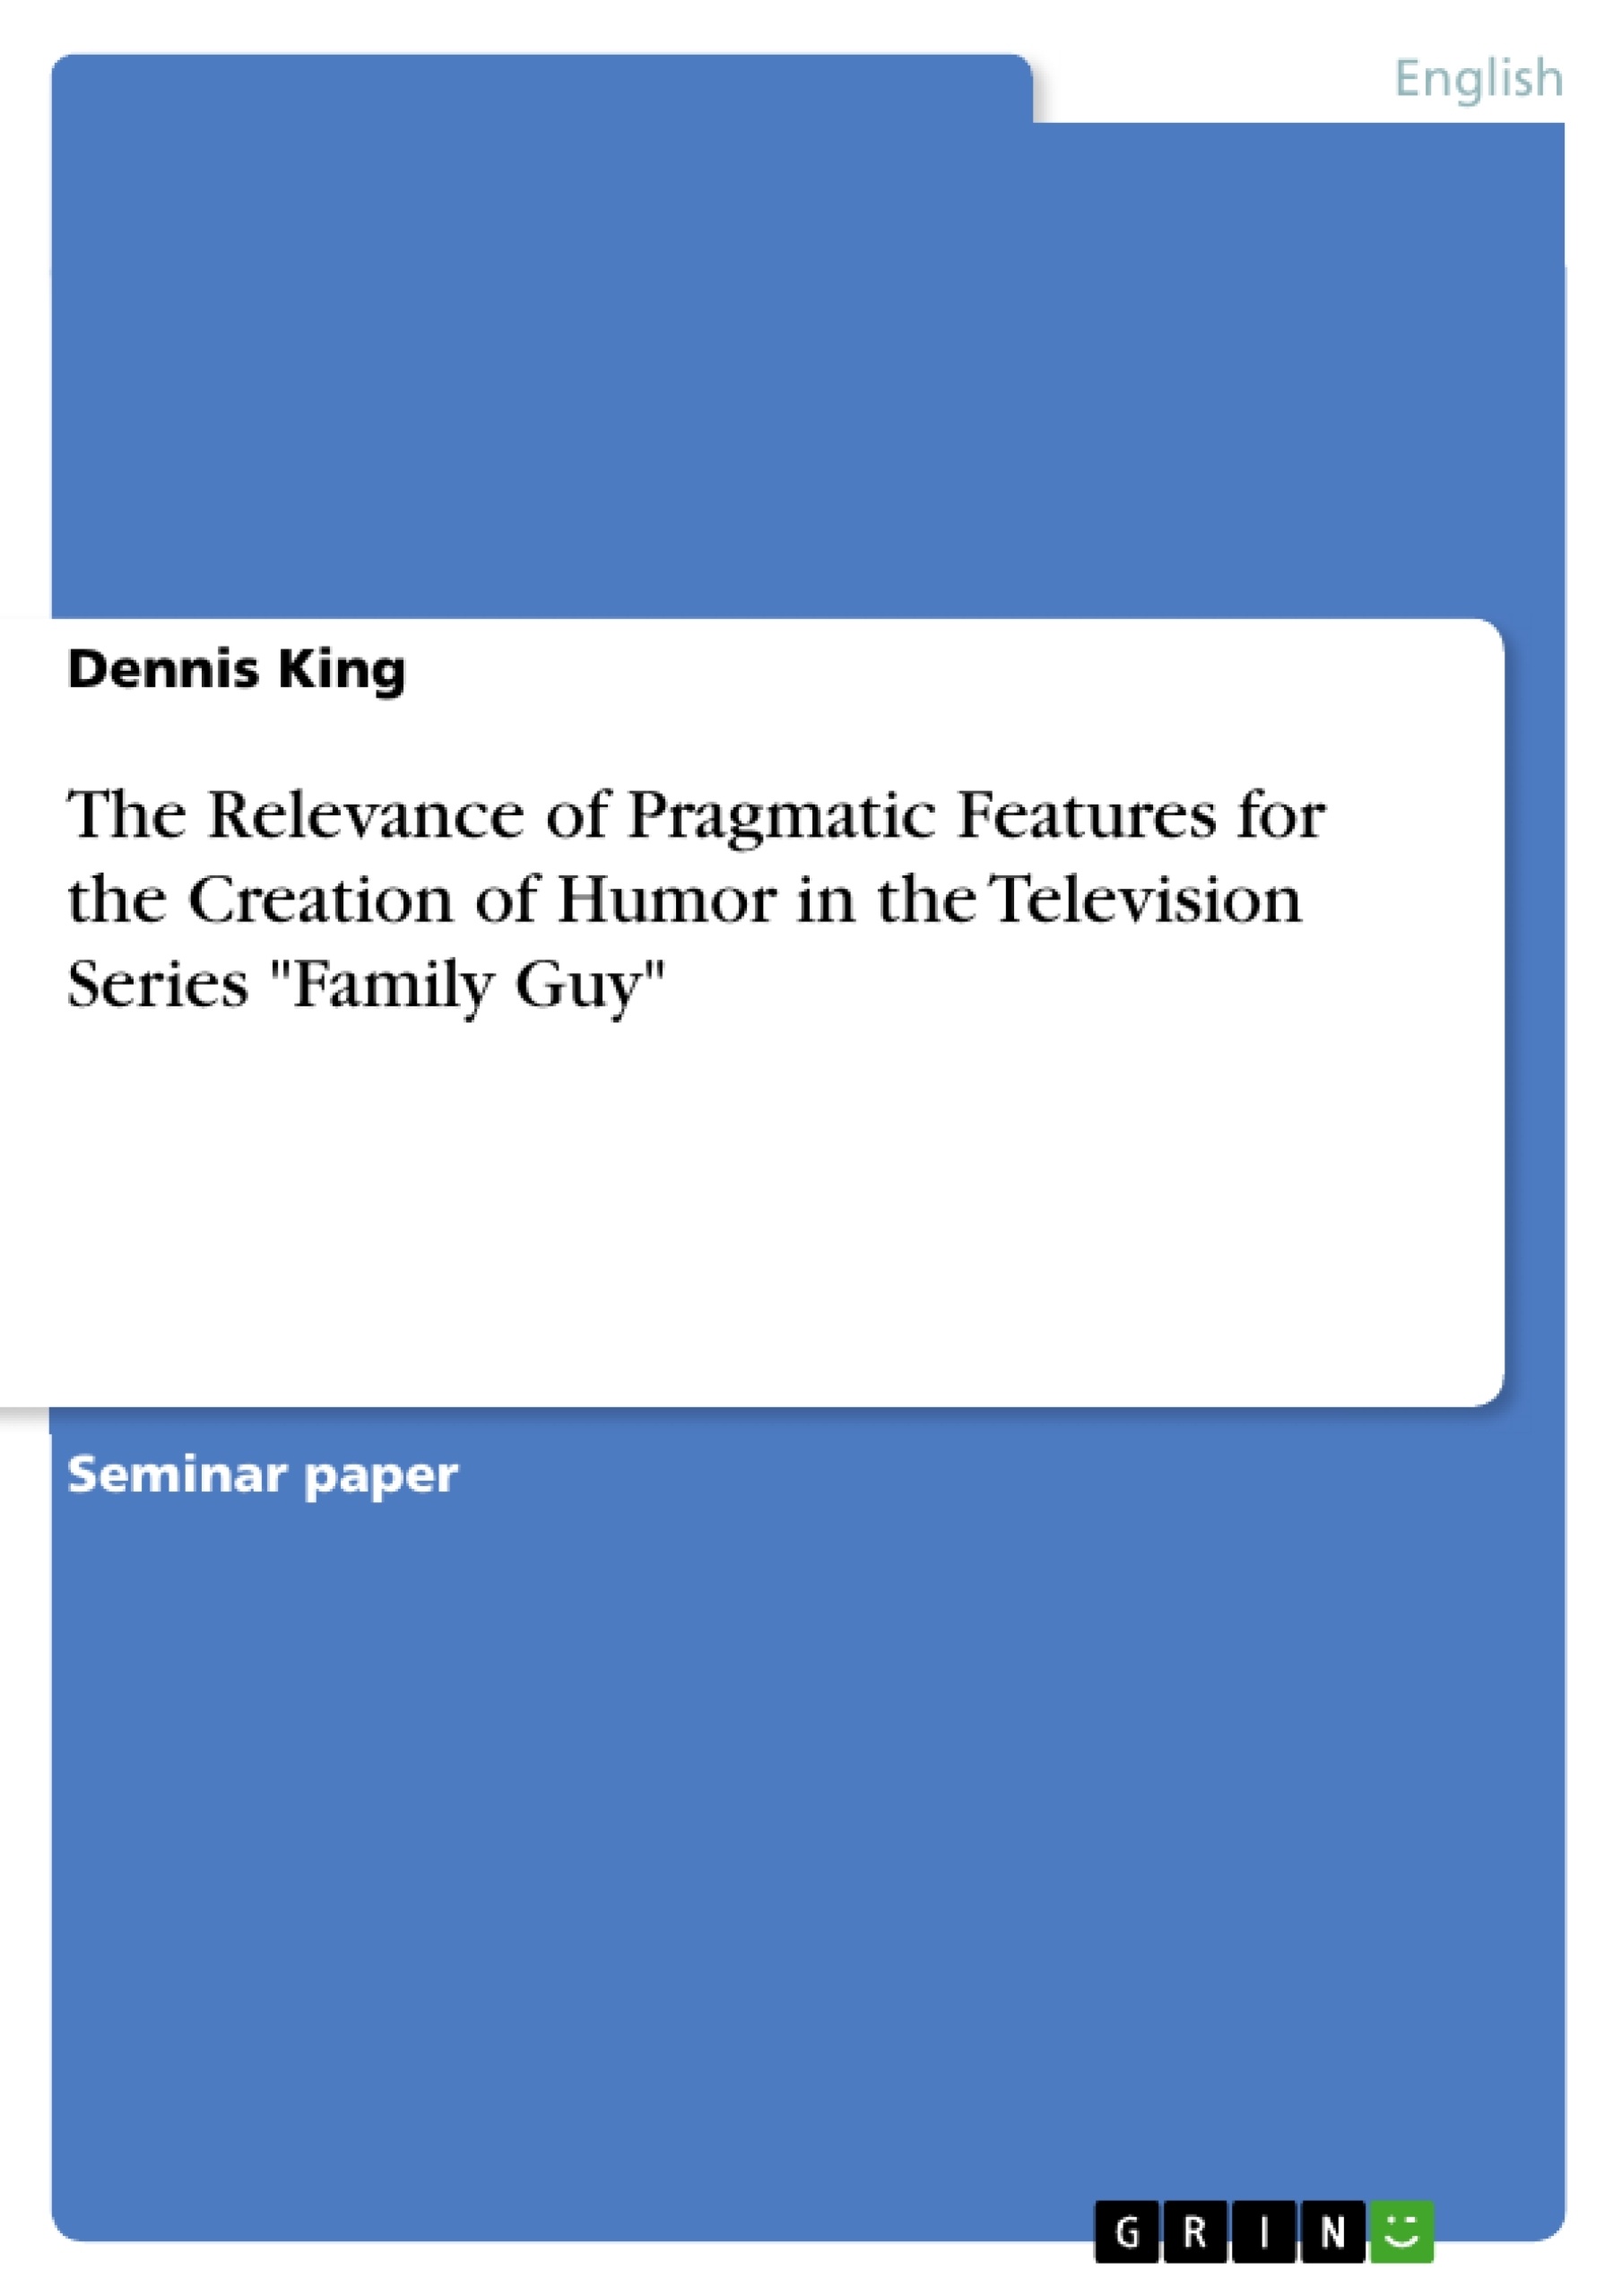 Titre: The Relevance of Pragmatic Features for the Creation of Humor in the Television Series "Family Guy"